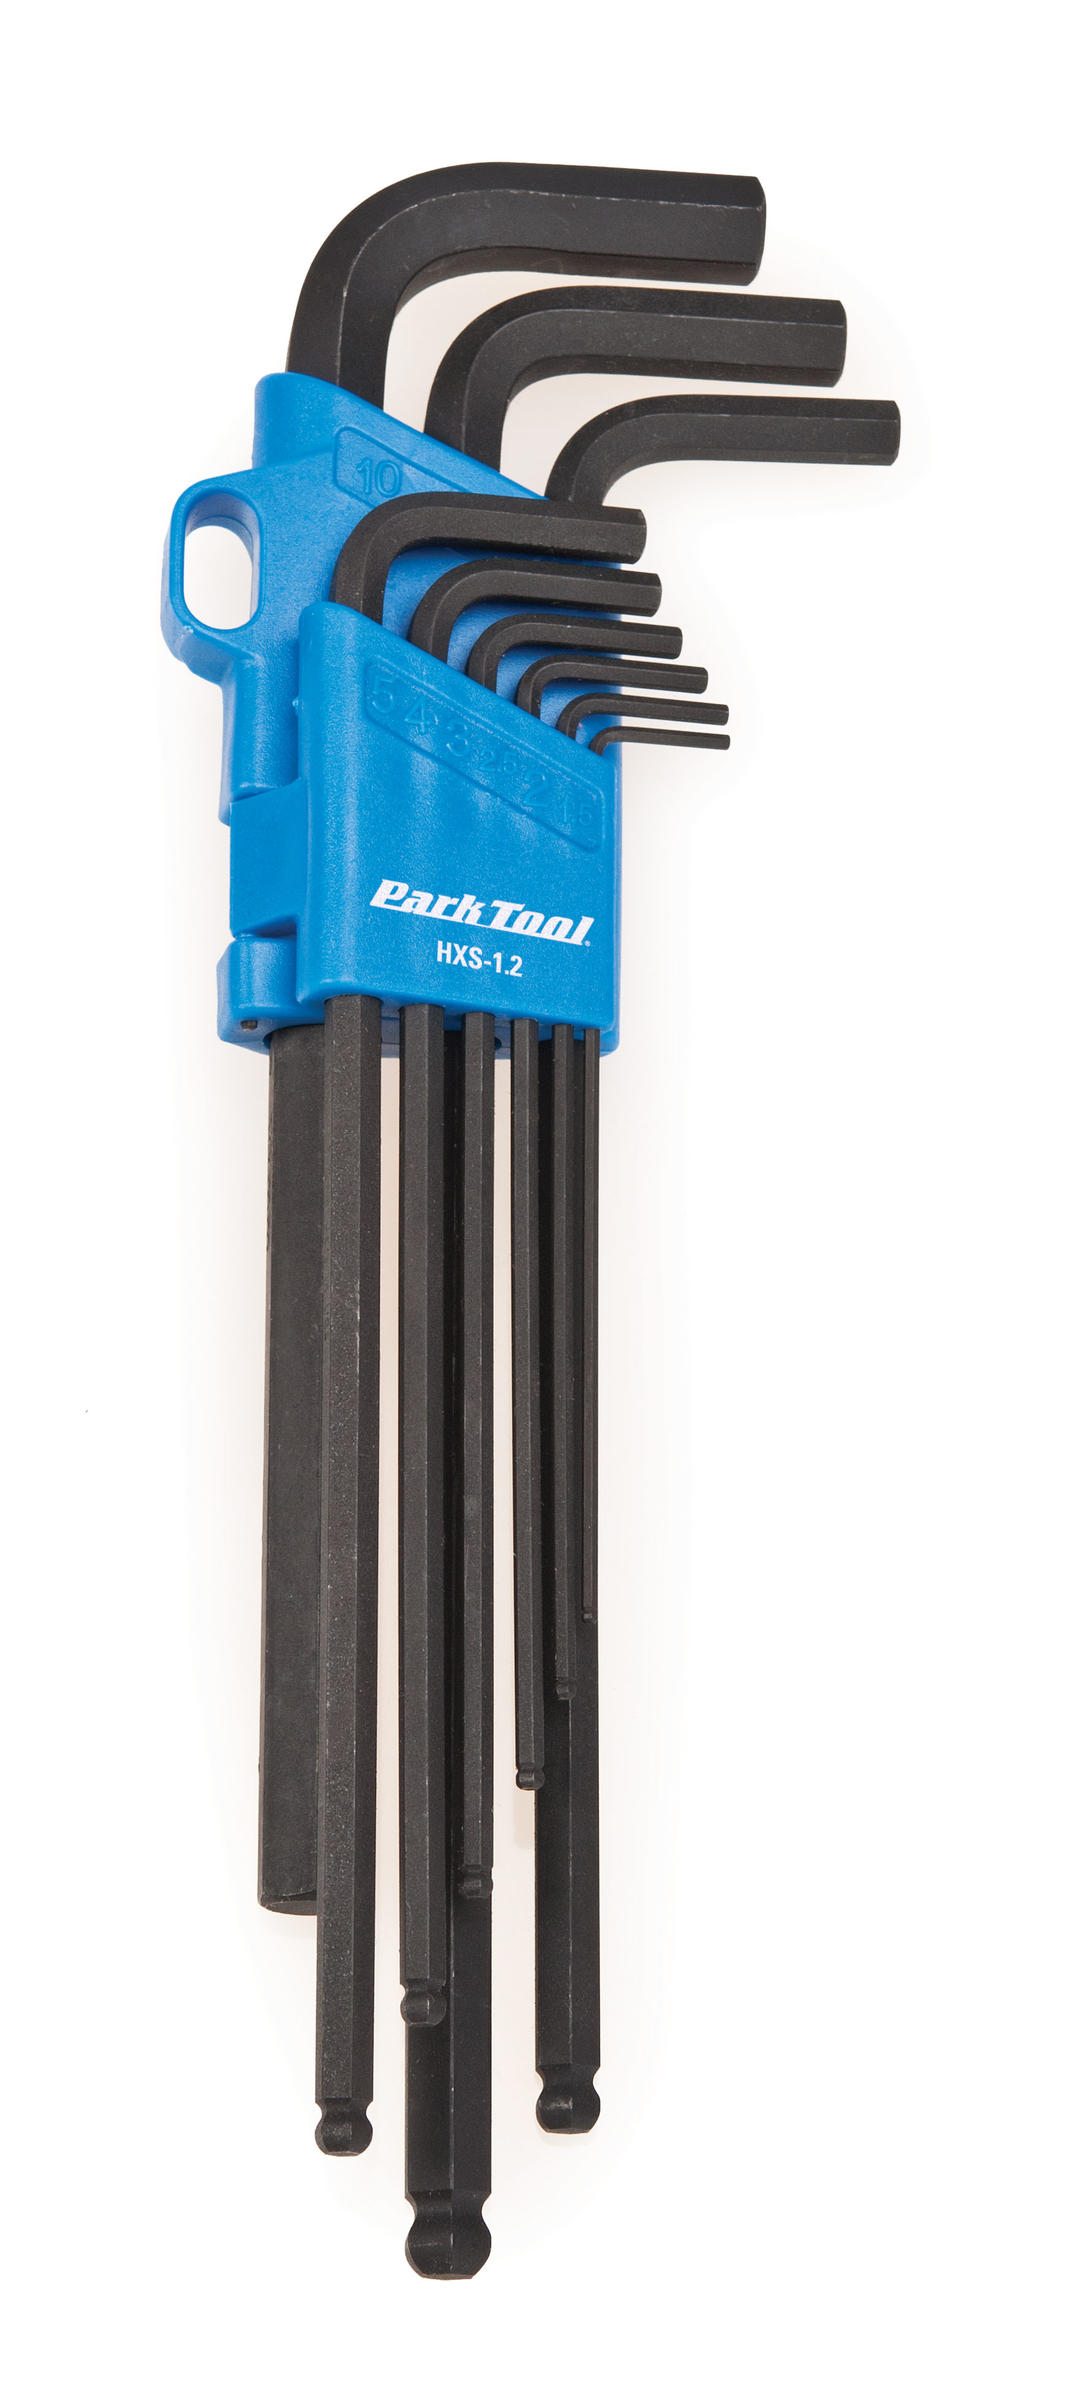 Park Tool L Shaped Hex Wrench 12mm for sale online 